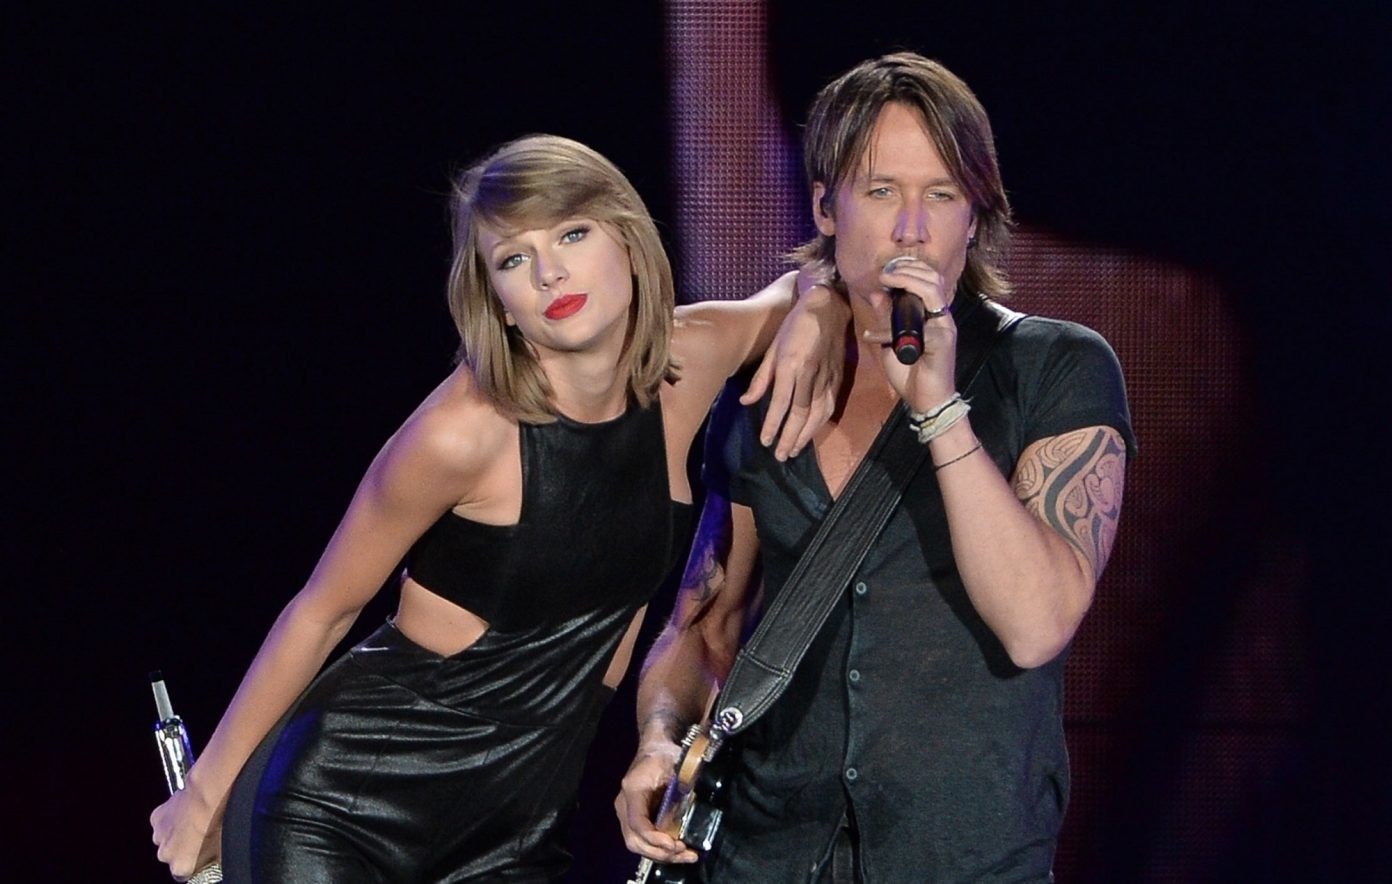 Taylor alongside Keith Urban on stage